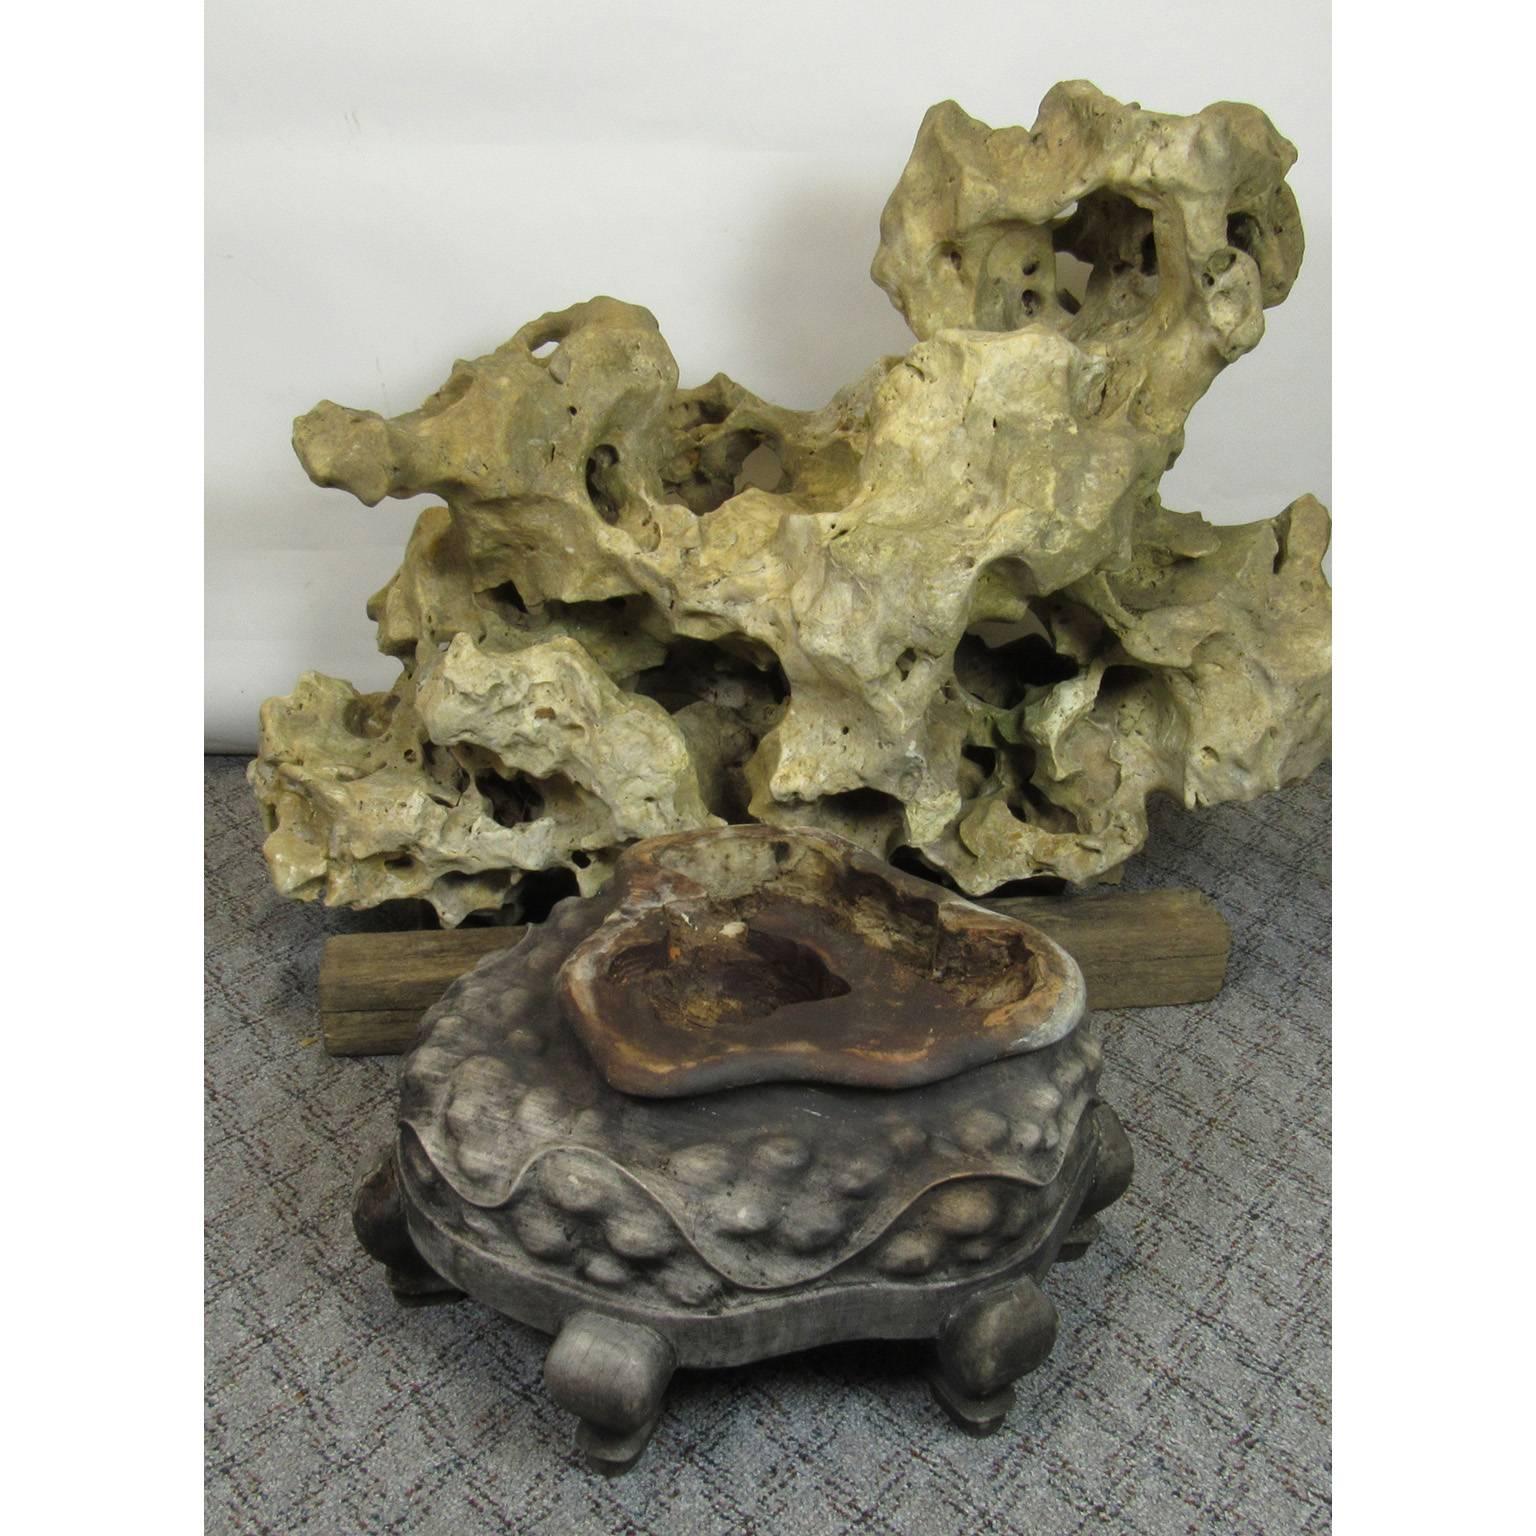 Large Taihu Gongshi (Scholar Stone) with original early 19th century hardwood carved base. Age deterioration no longer allows stone to fit into base. Could be remounted.
Dimensions: 26 x 32 x 18 inches.